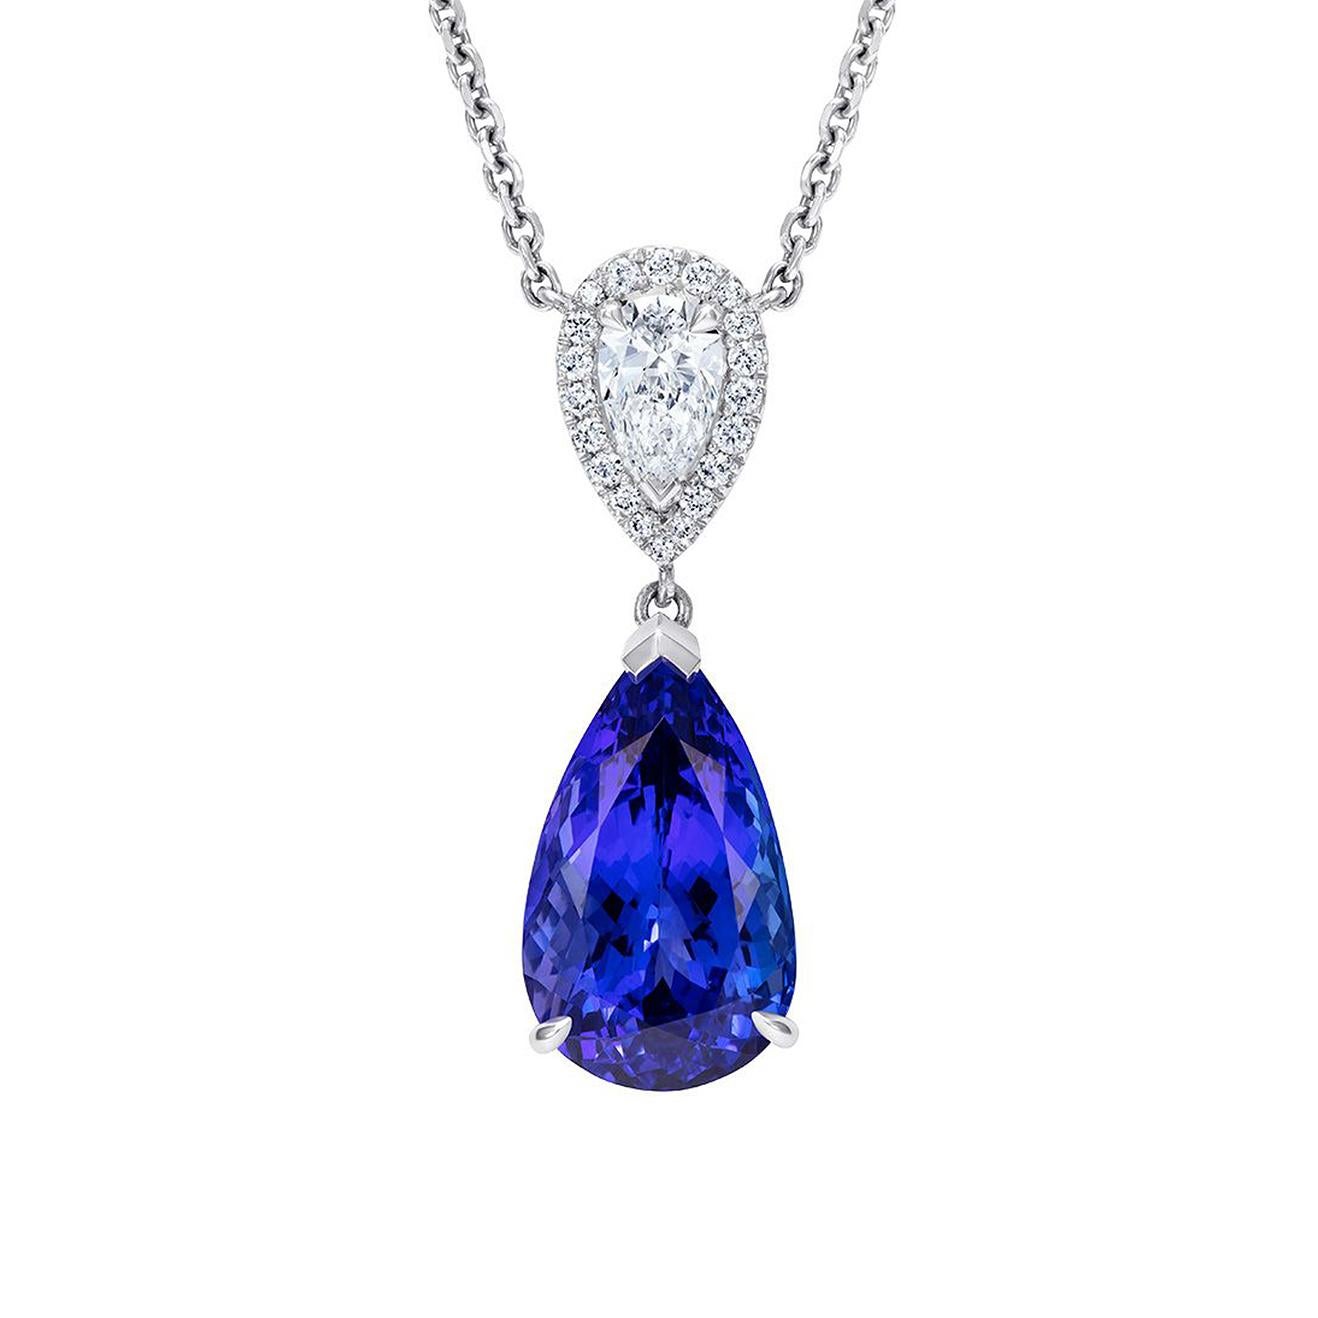 A beautiful, pear shape tanzanite is set in the Hirsh Burlington setting below a diamond top. Further round diamonds set around the pear shape diamond and discreetly in the collet.

- 6.63 carat pear shape tanzanite
- 0.42 carat pear shape diamond
-